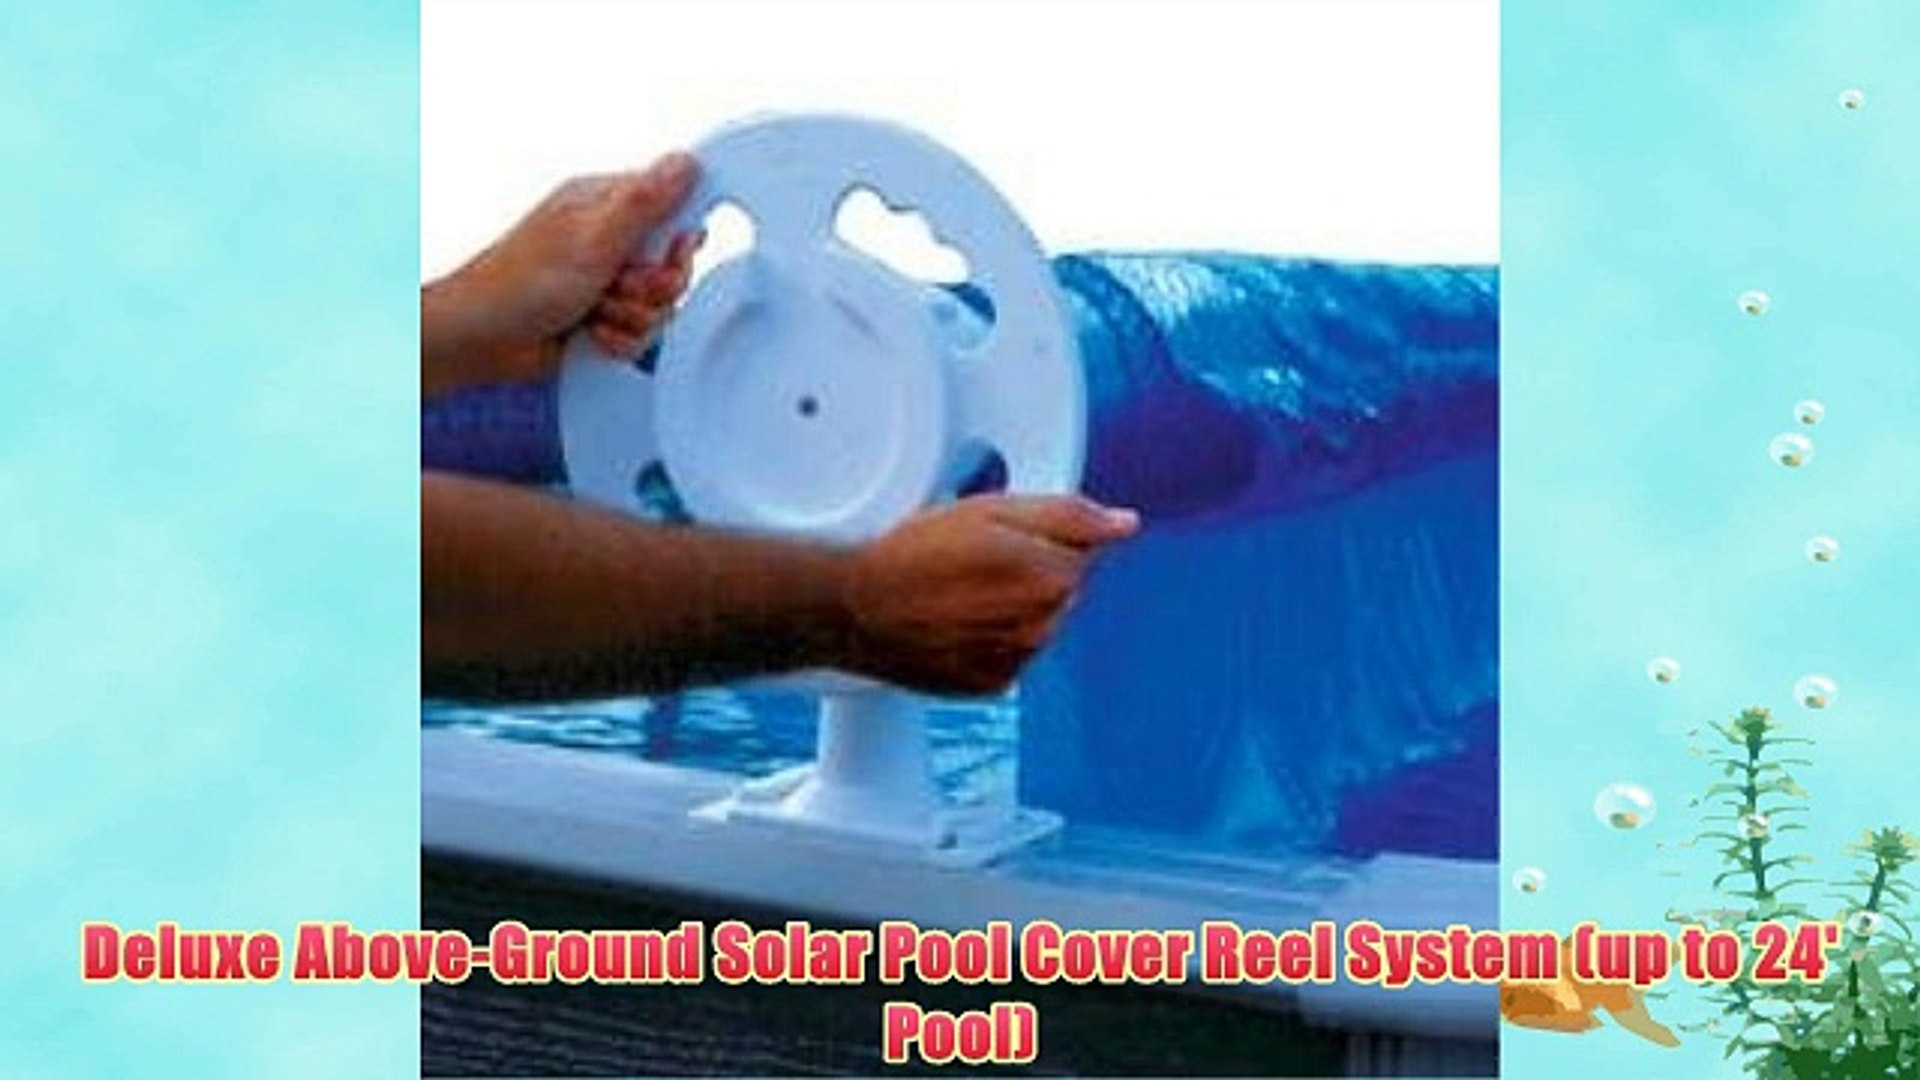 Deluxe Above-Ground Solar Pool Cover Reel System (up to 24' Pool